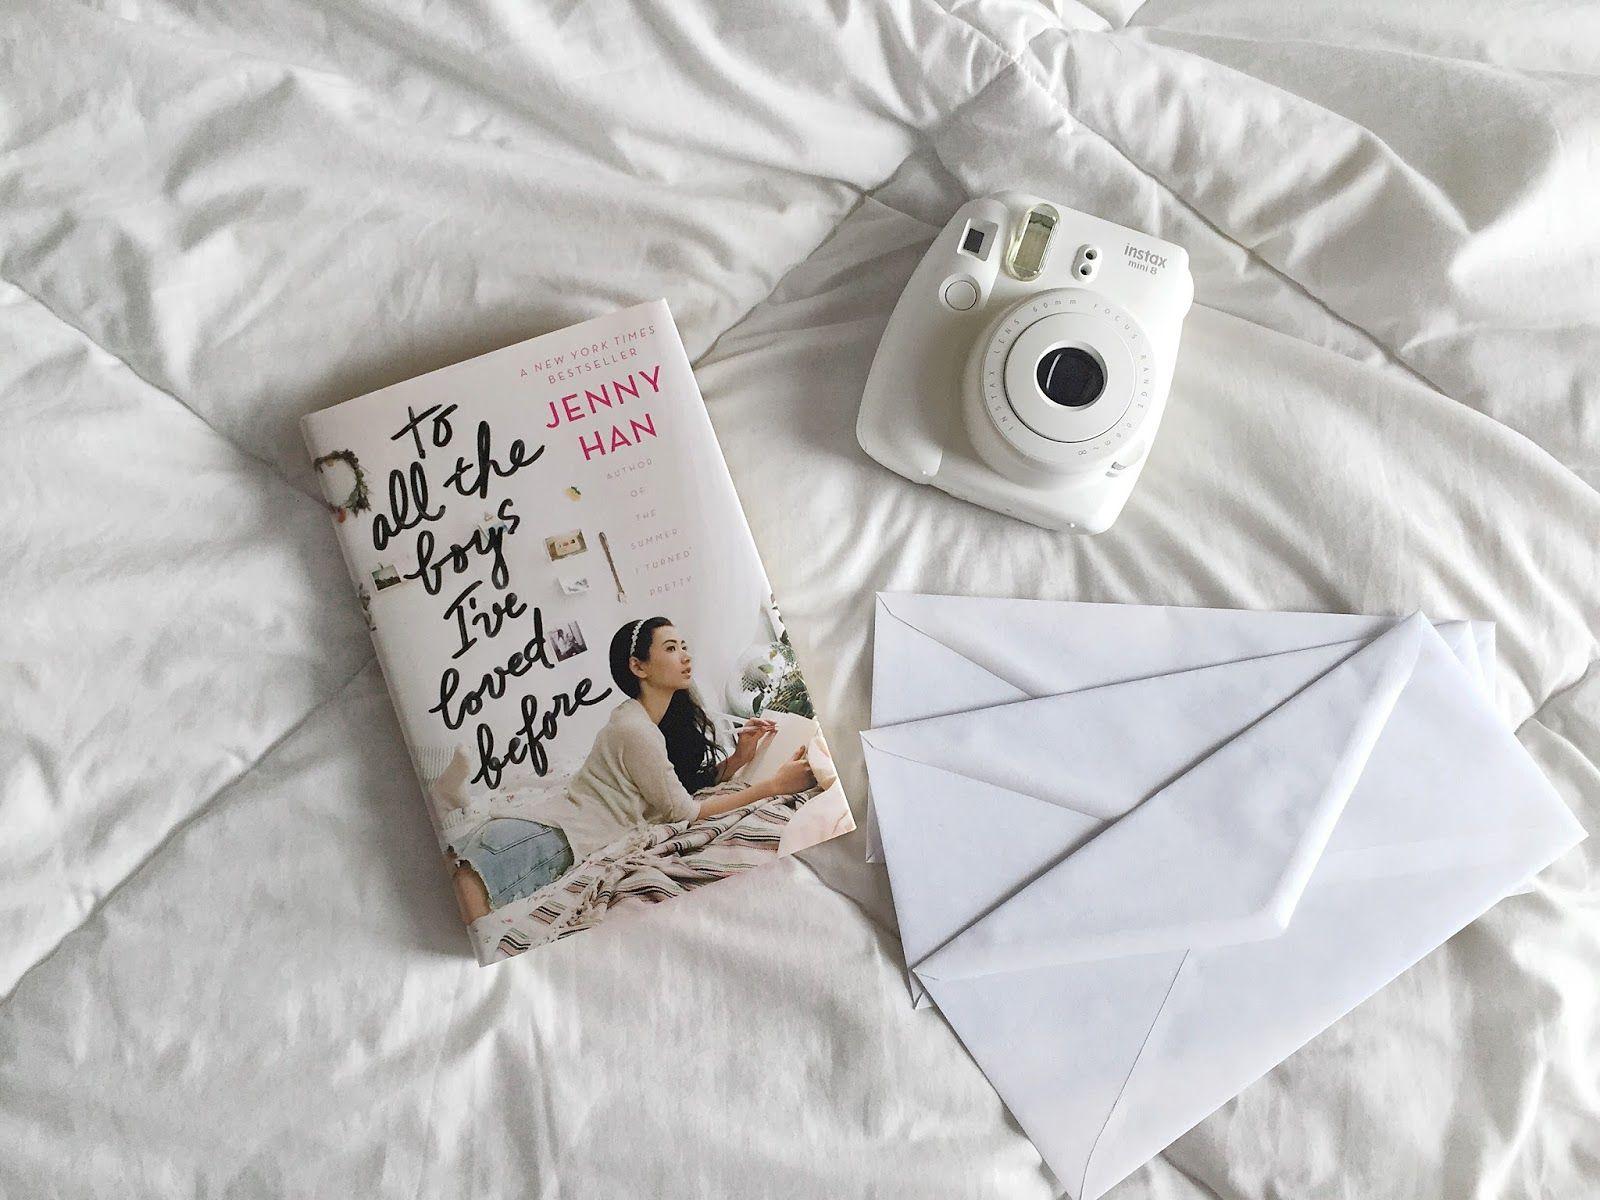 My Midnight Reads: Book Review: To all the Boys I've loved before